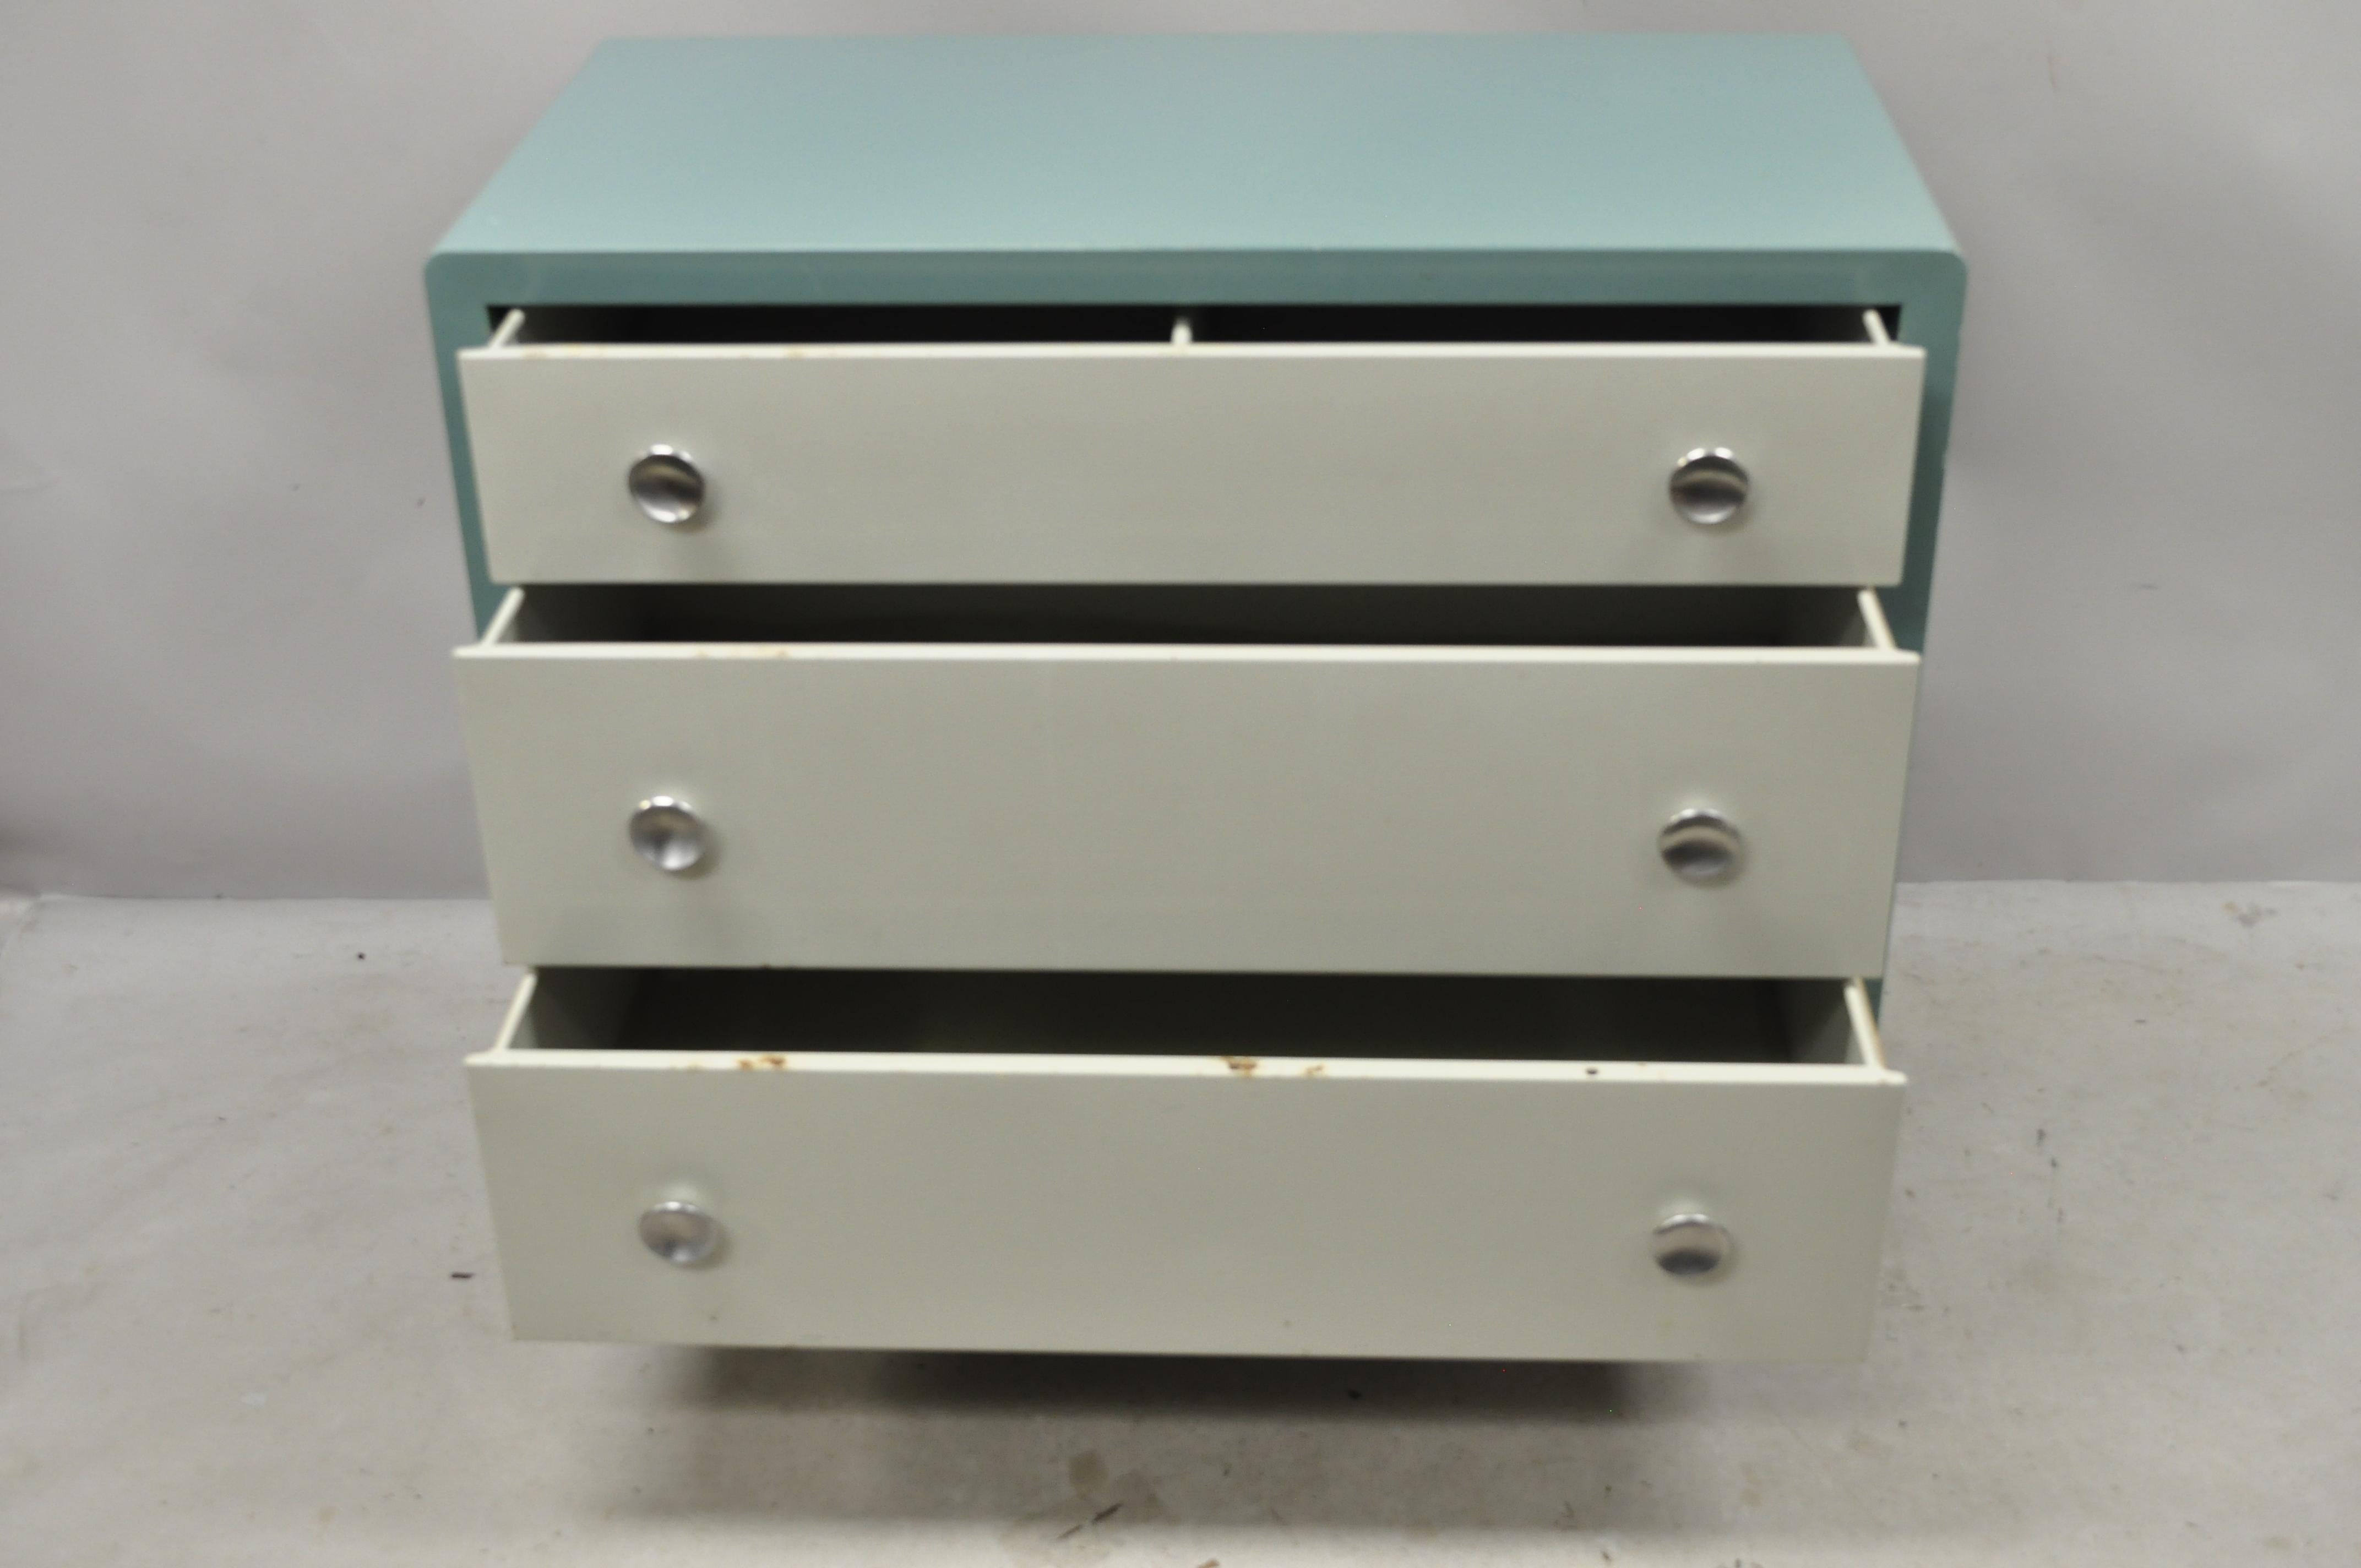 Norman Bel Geddes for Simmons steel metal modern blue white dresser chest. Item features original aqua blue and white painted finish, steel metal frame, original label, 3 dovetailed drawers, circa early to mid-20th century. Measurements: 34